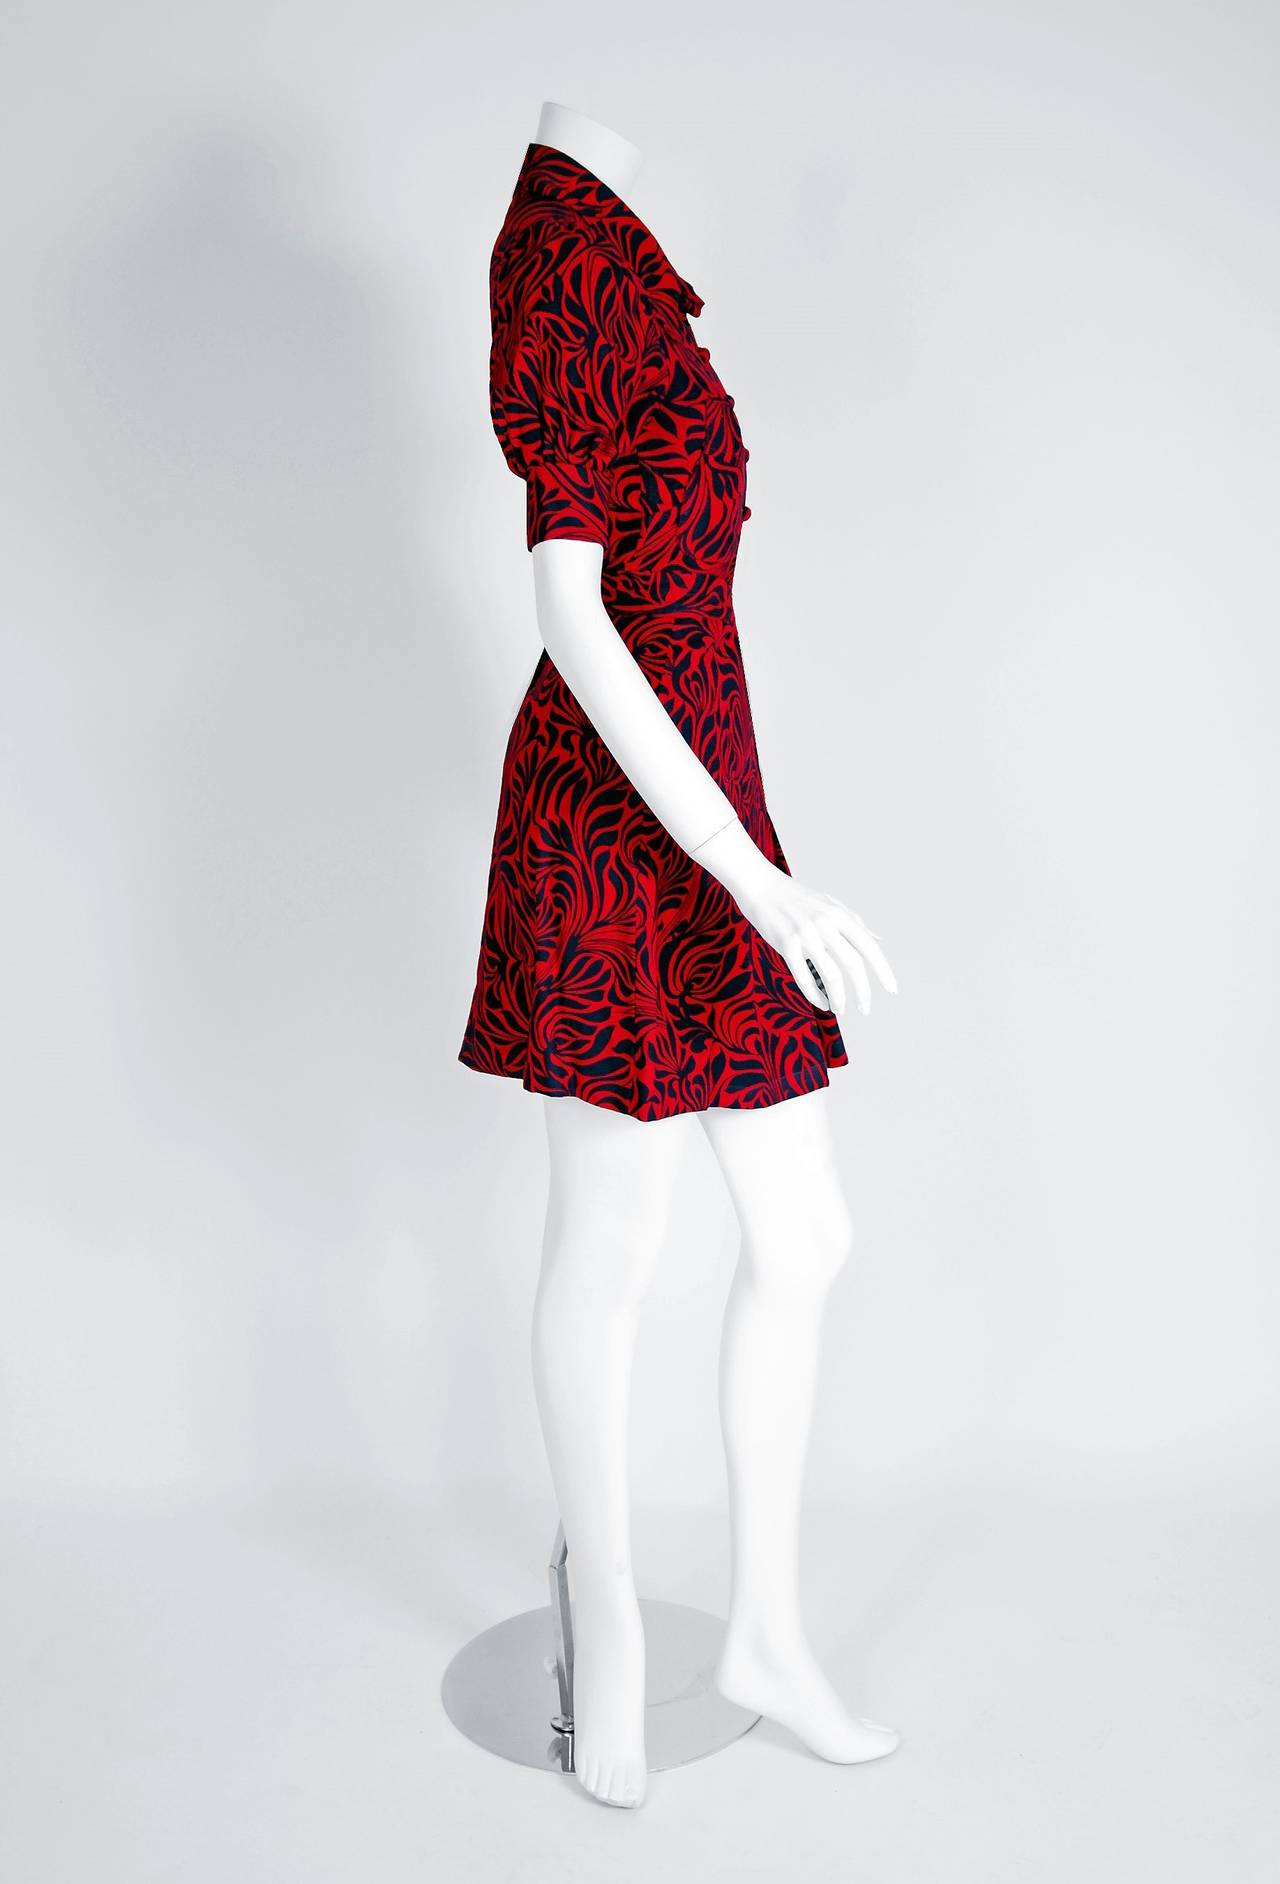 If you were an “It Girl” in London during the 1960's and 1970's, Biba is where you would have shopped. This beautiful red and navy art-nouveau printed set is a perfect example of the brand's genius. It is a rich knit-cotton with all the classic